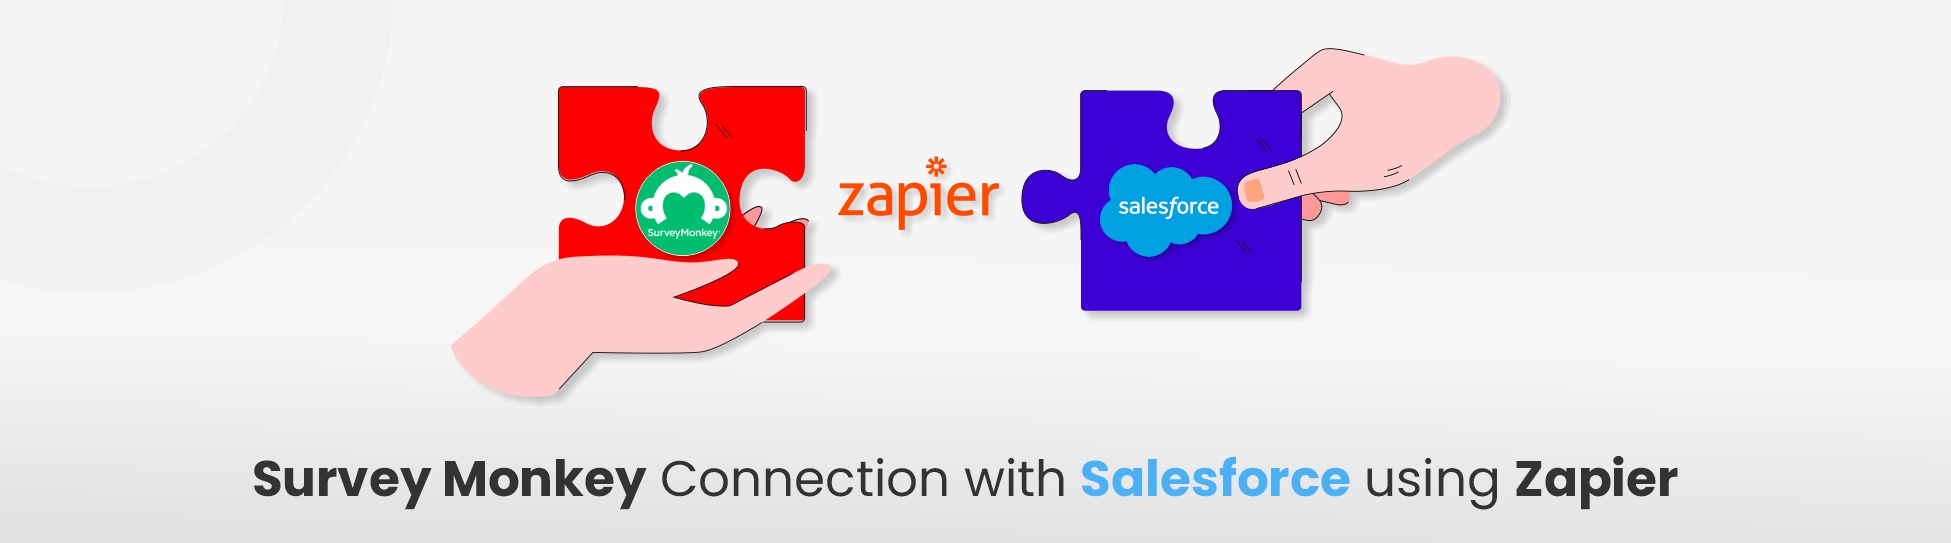 Survey-Monkey-Connection-with-Salesforce-using-Zapier